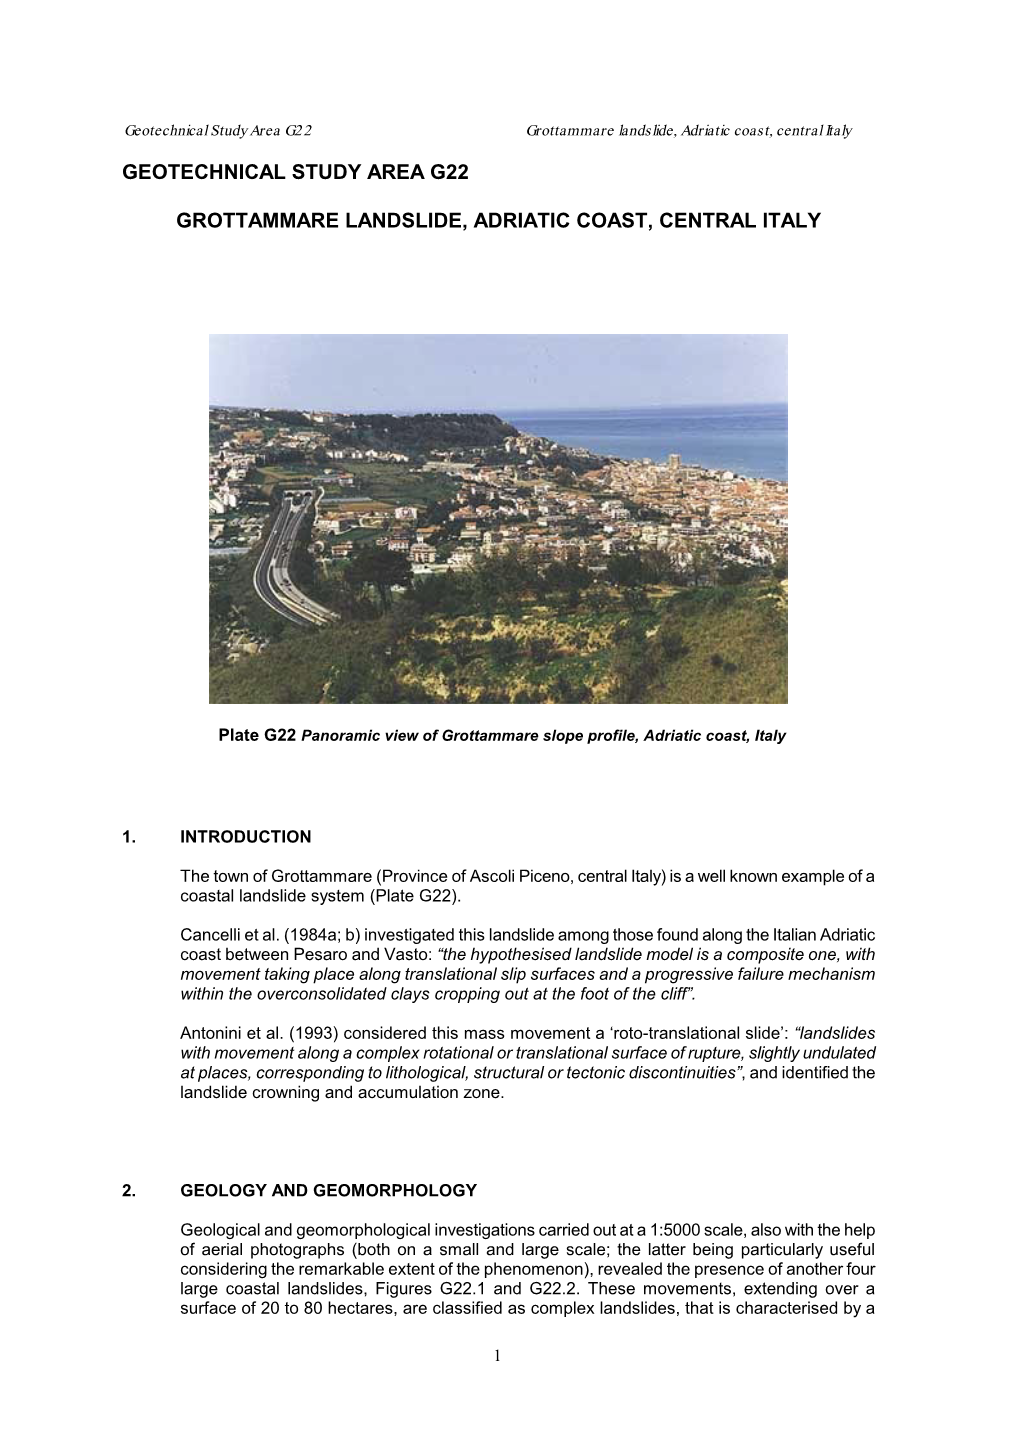 Geotechnical Study Area G22 Grottammare Landslide, Adriatic Coast, Central Italy